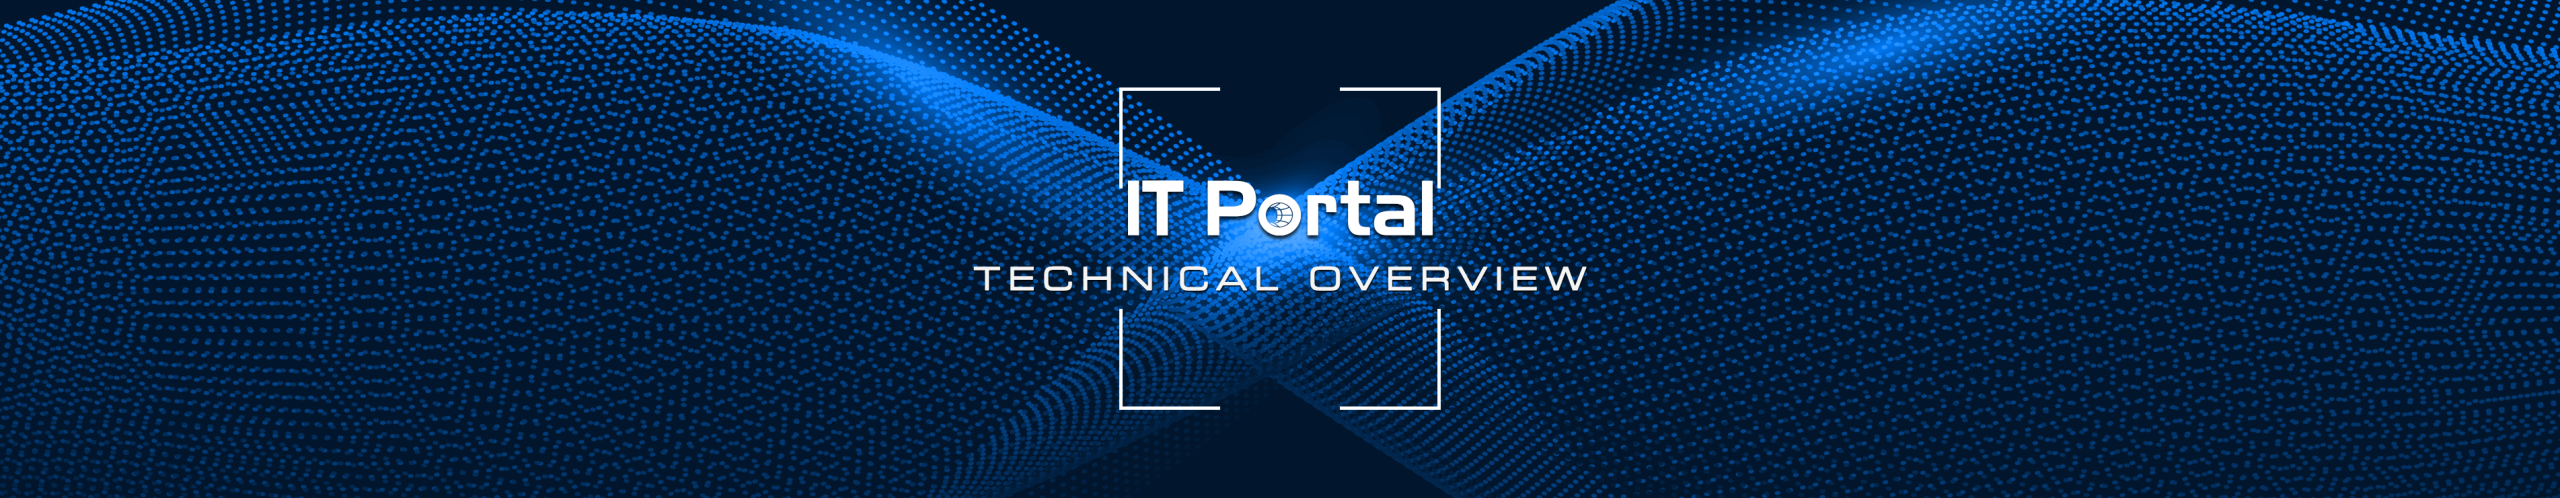 IT Portal Technical Overview